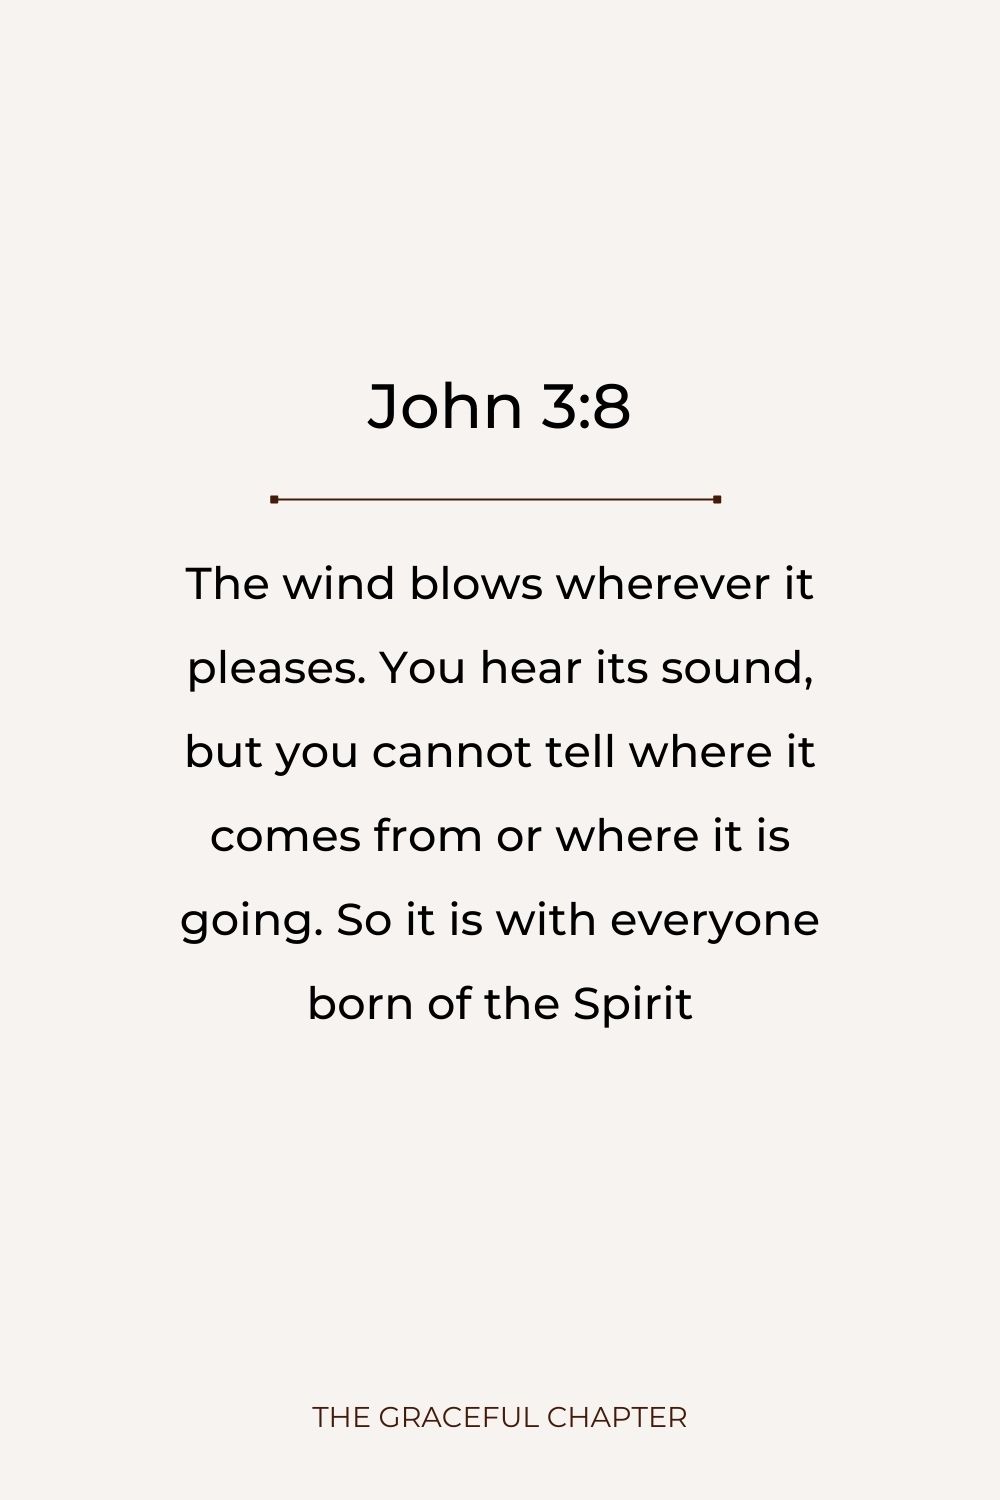 The wind blows wherever it pleases. You hear its sound, but you cannot tell where it comes from or where it is going. So it is with everyone born of the Spirit. John 3:8